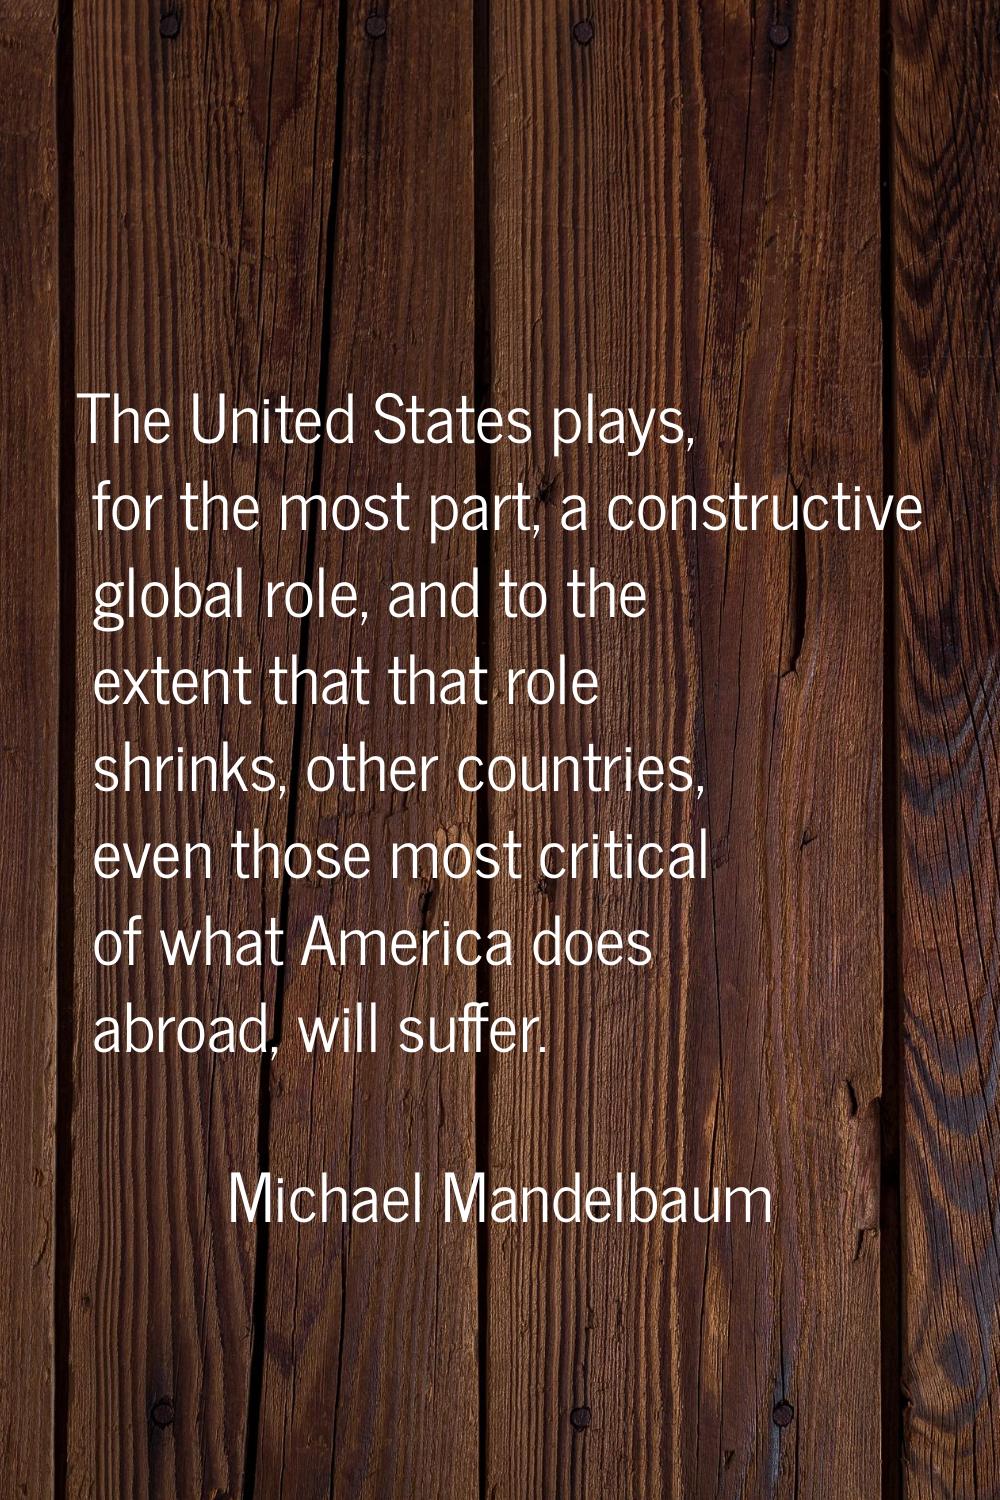 The United States plays, for the most part, a constructive global role, and to the extent that that